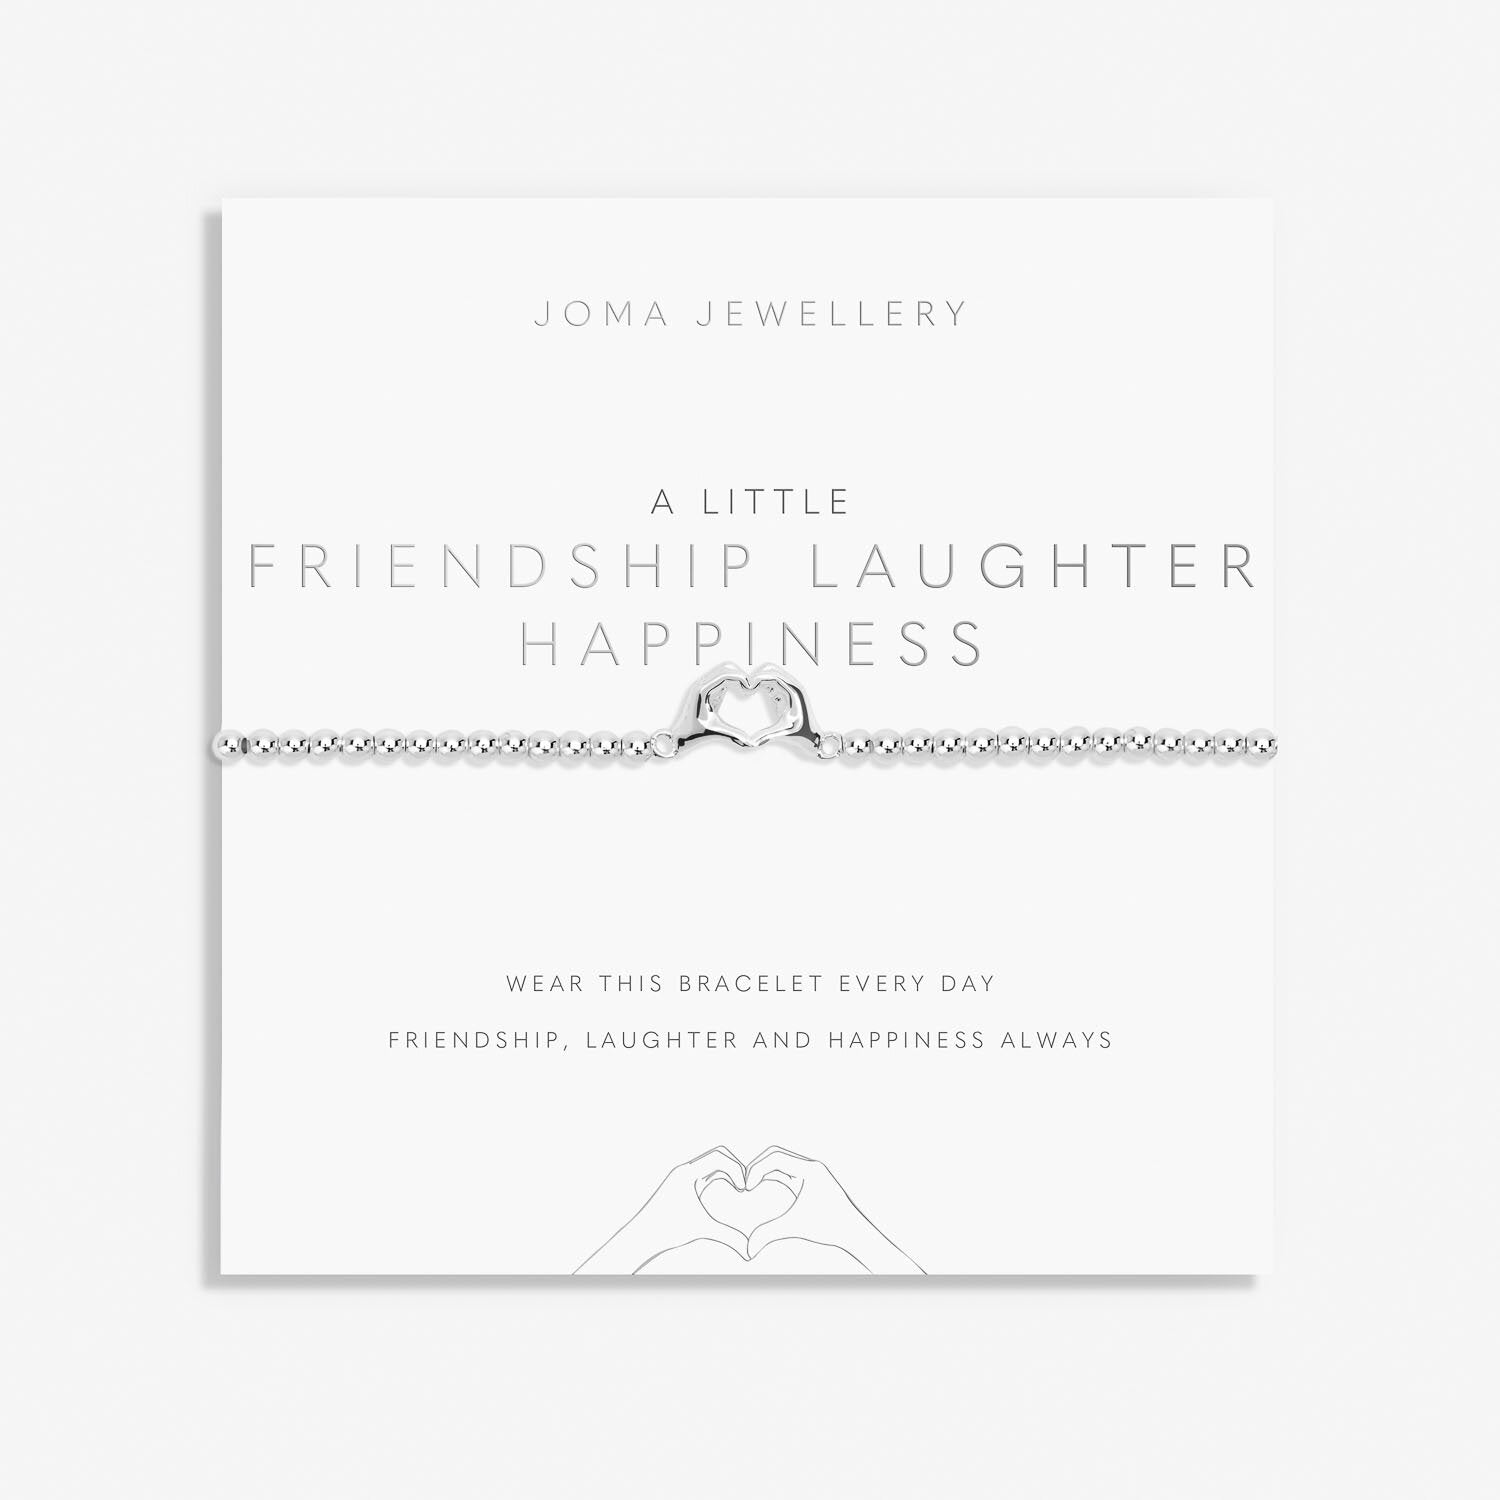 A Little 'Friendship Laughter Happiness' Bracelet - Joma Jewellery